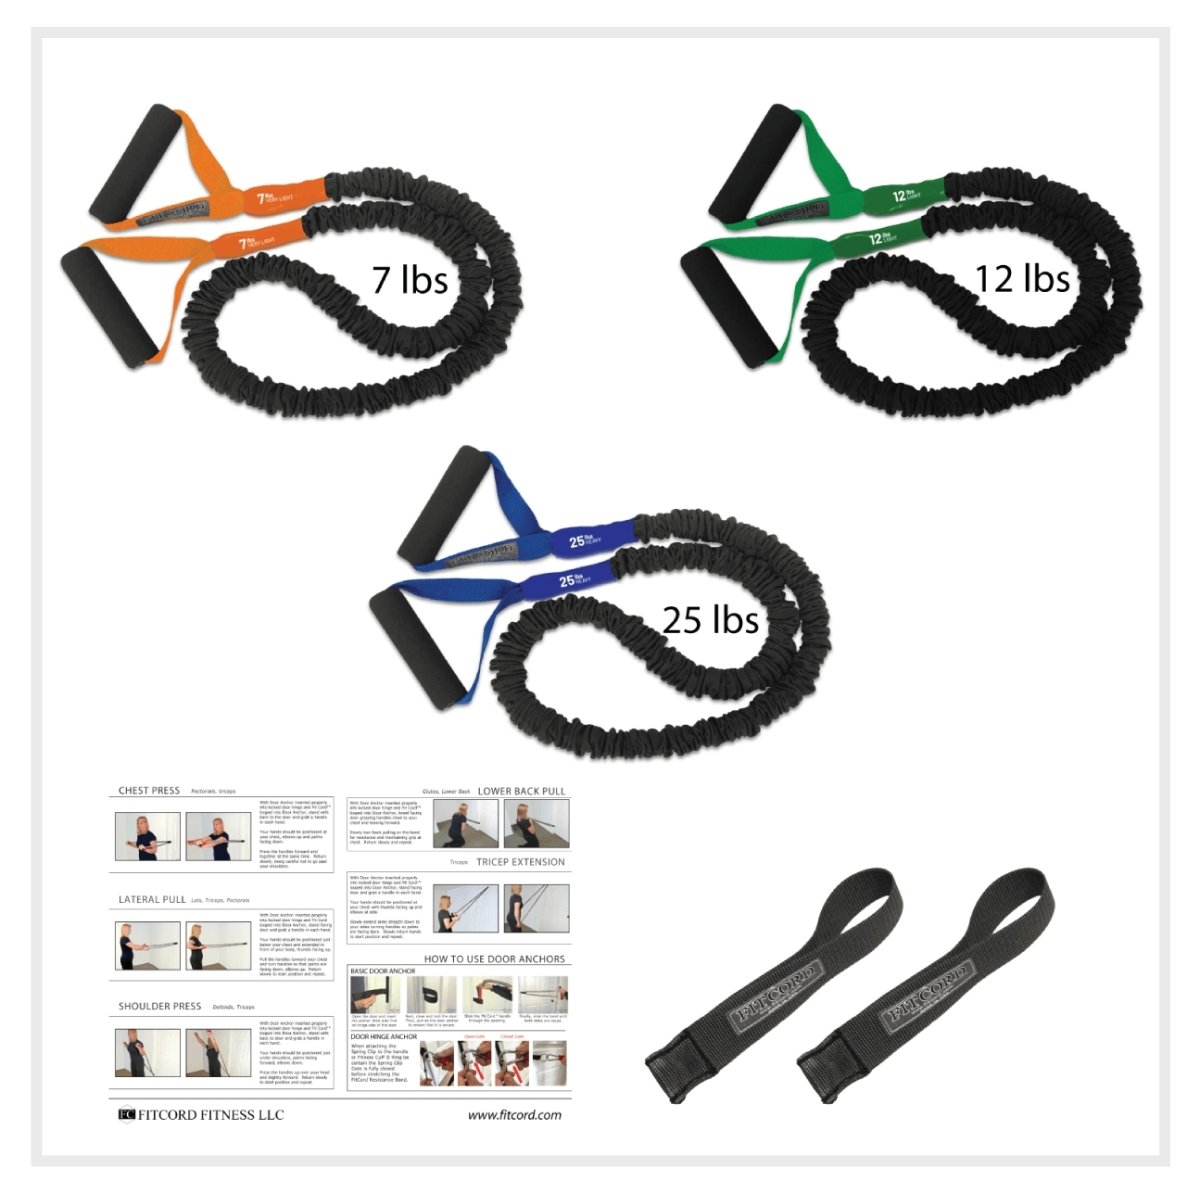 Compare to stroops . Exercise home gym. Best Resistance bands on the market today. American made with the Quality and pride that goes with it.